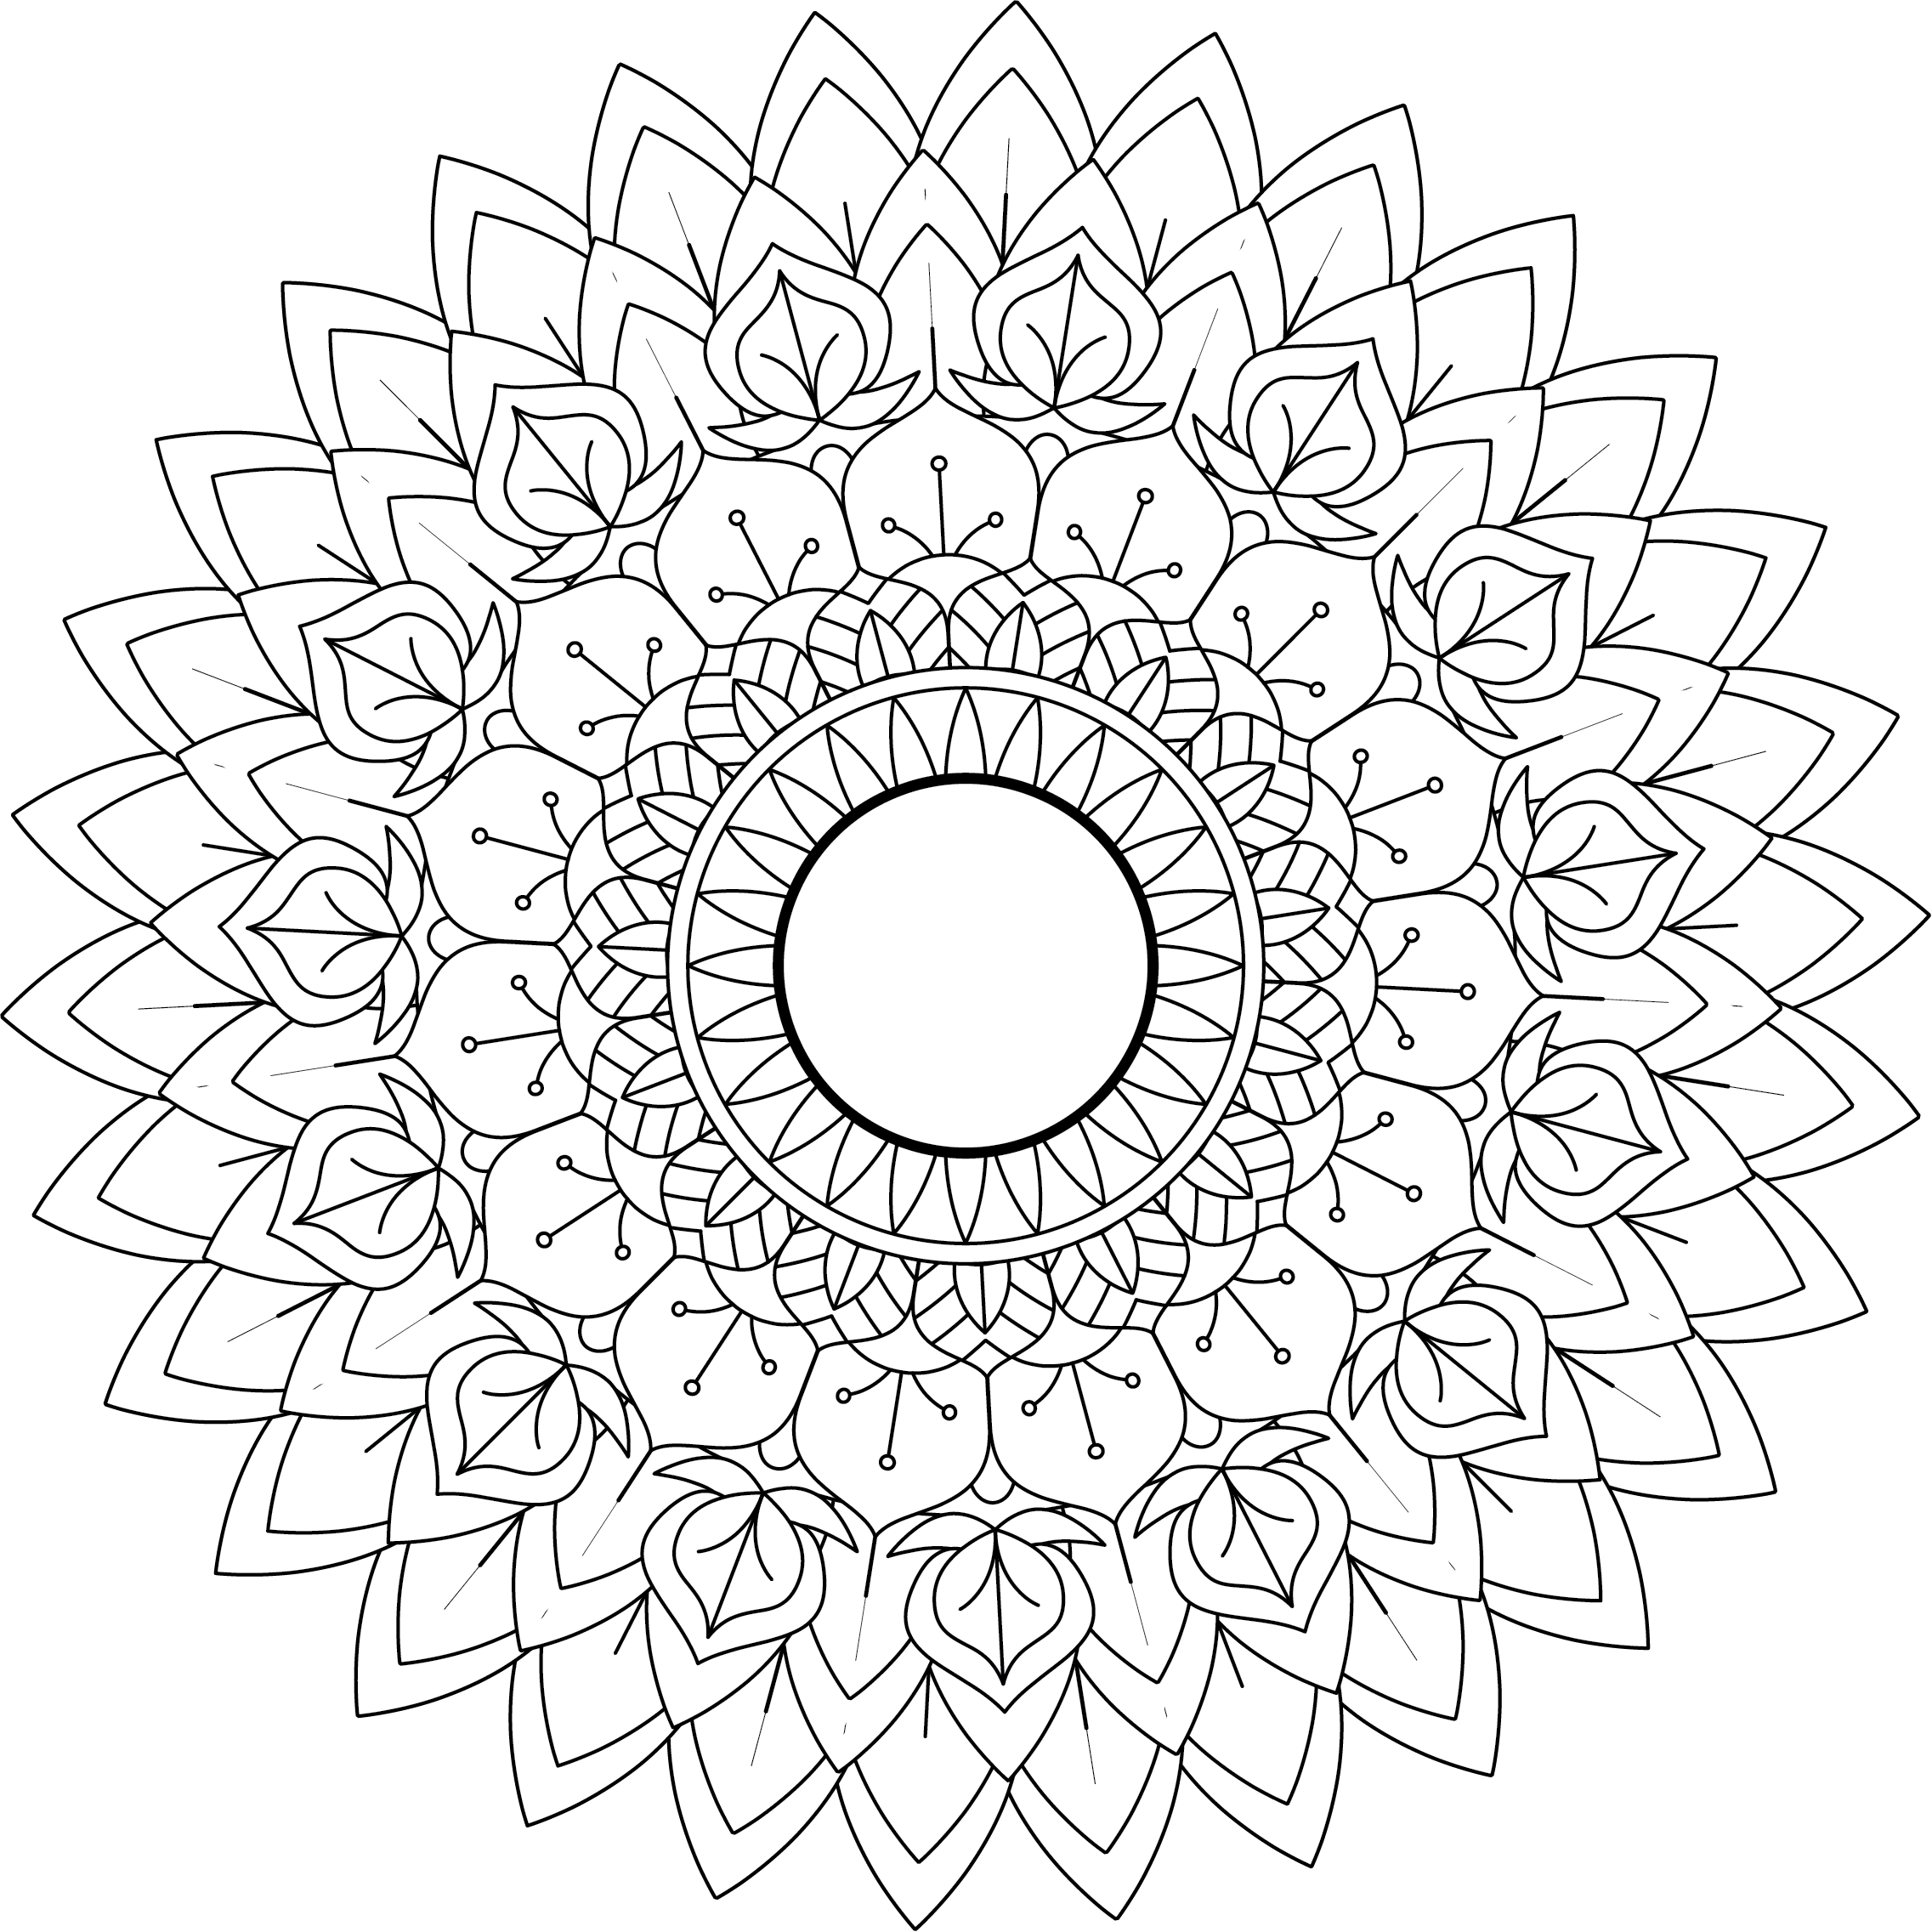 Mandala Monday Free Design To Download And Colour 2019 - 10